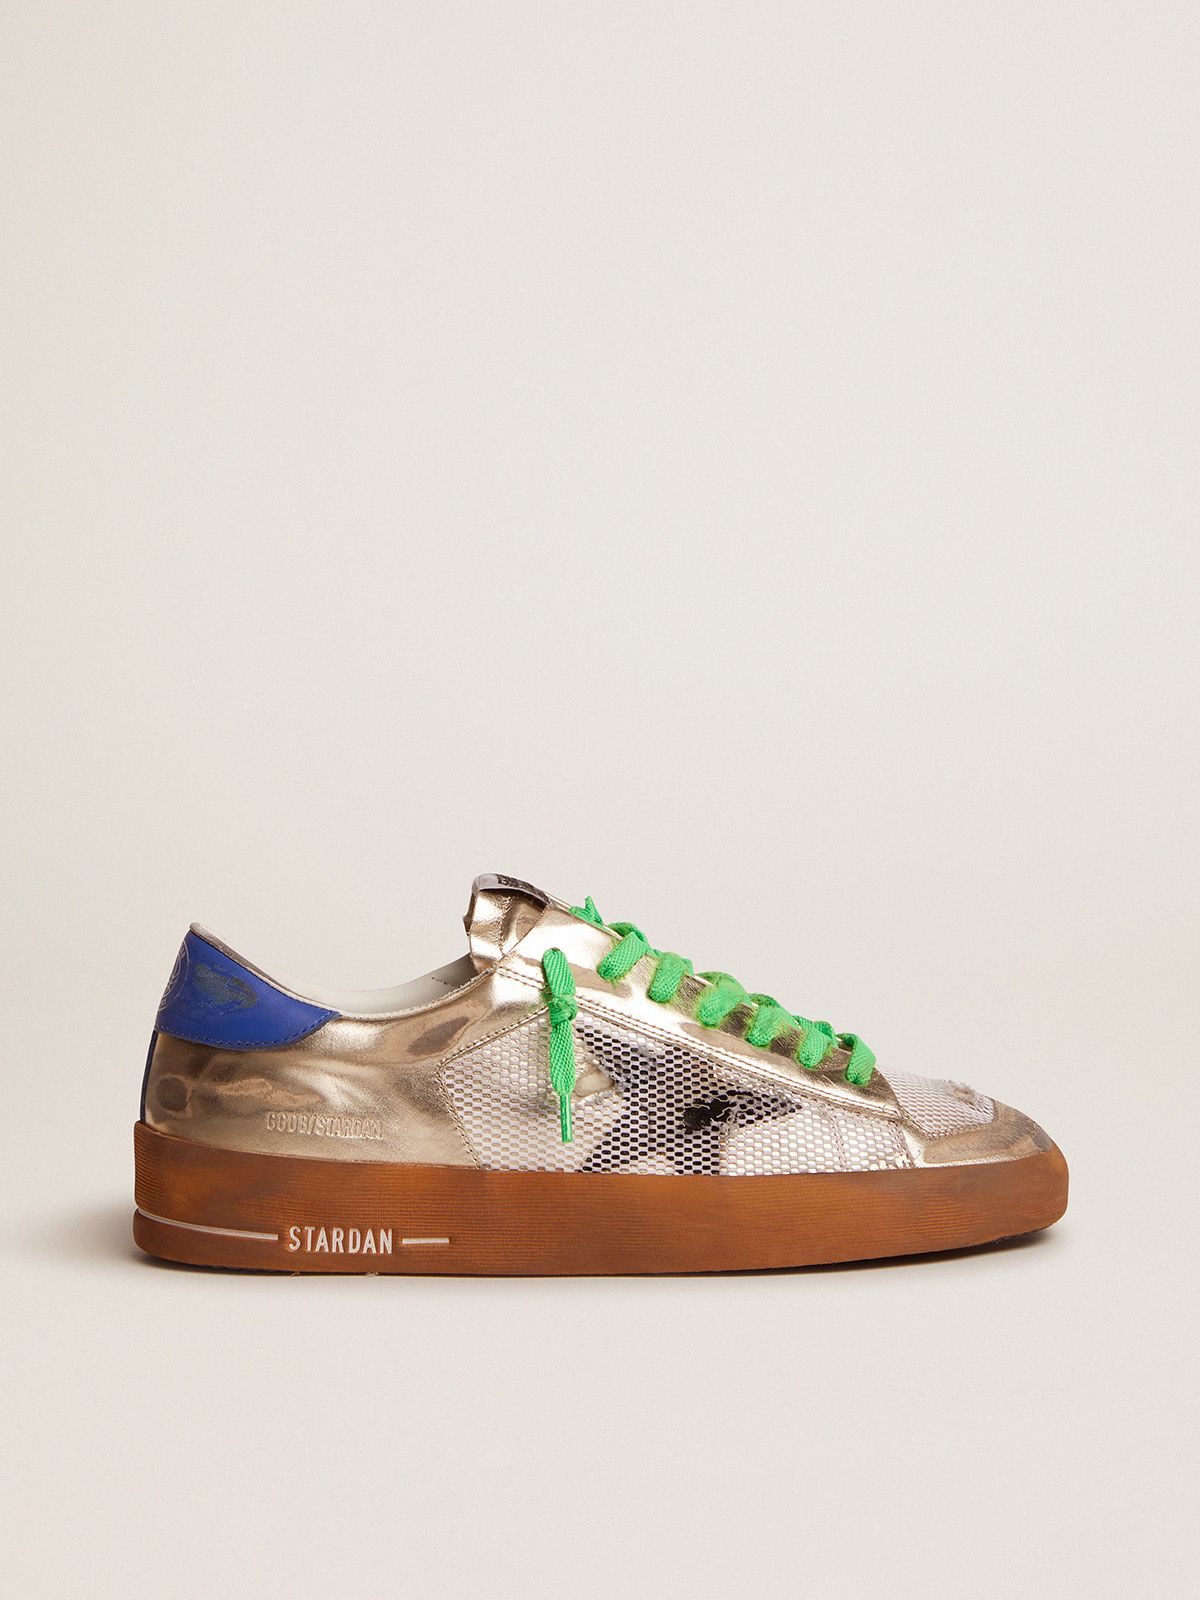 golden goose heel laminated leather Stardan electric with sneakers in tab an mesh and LAB blue